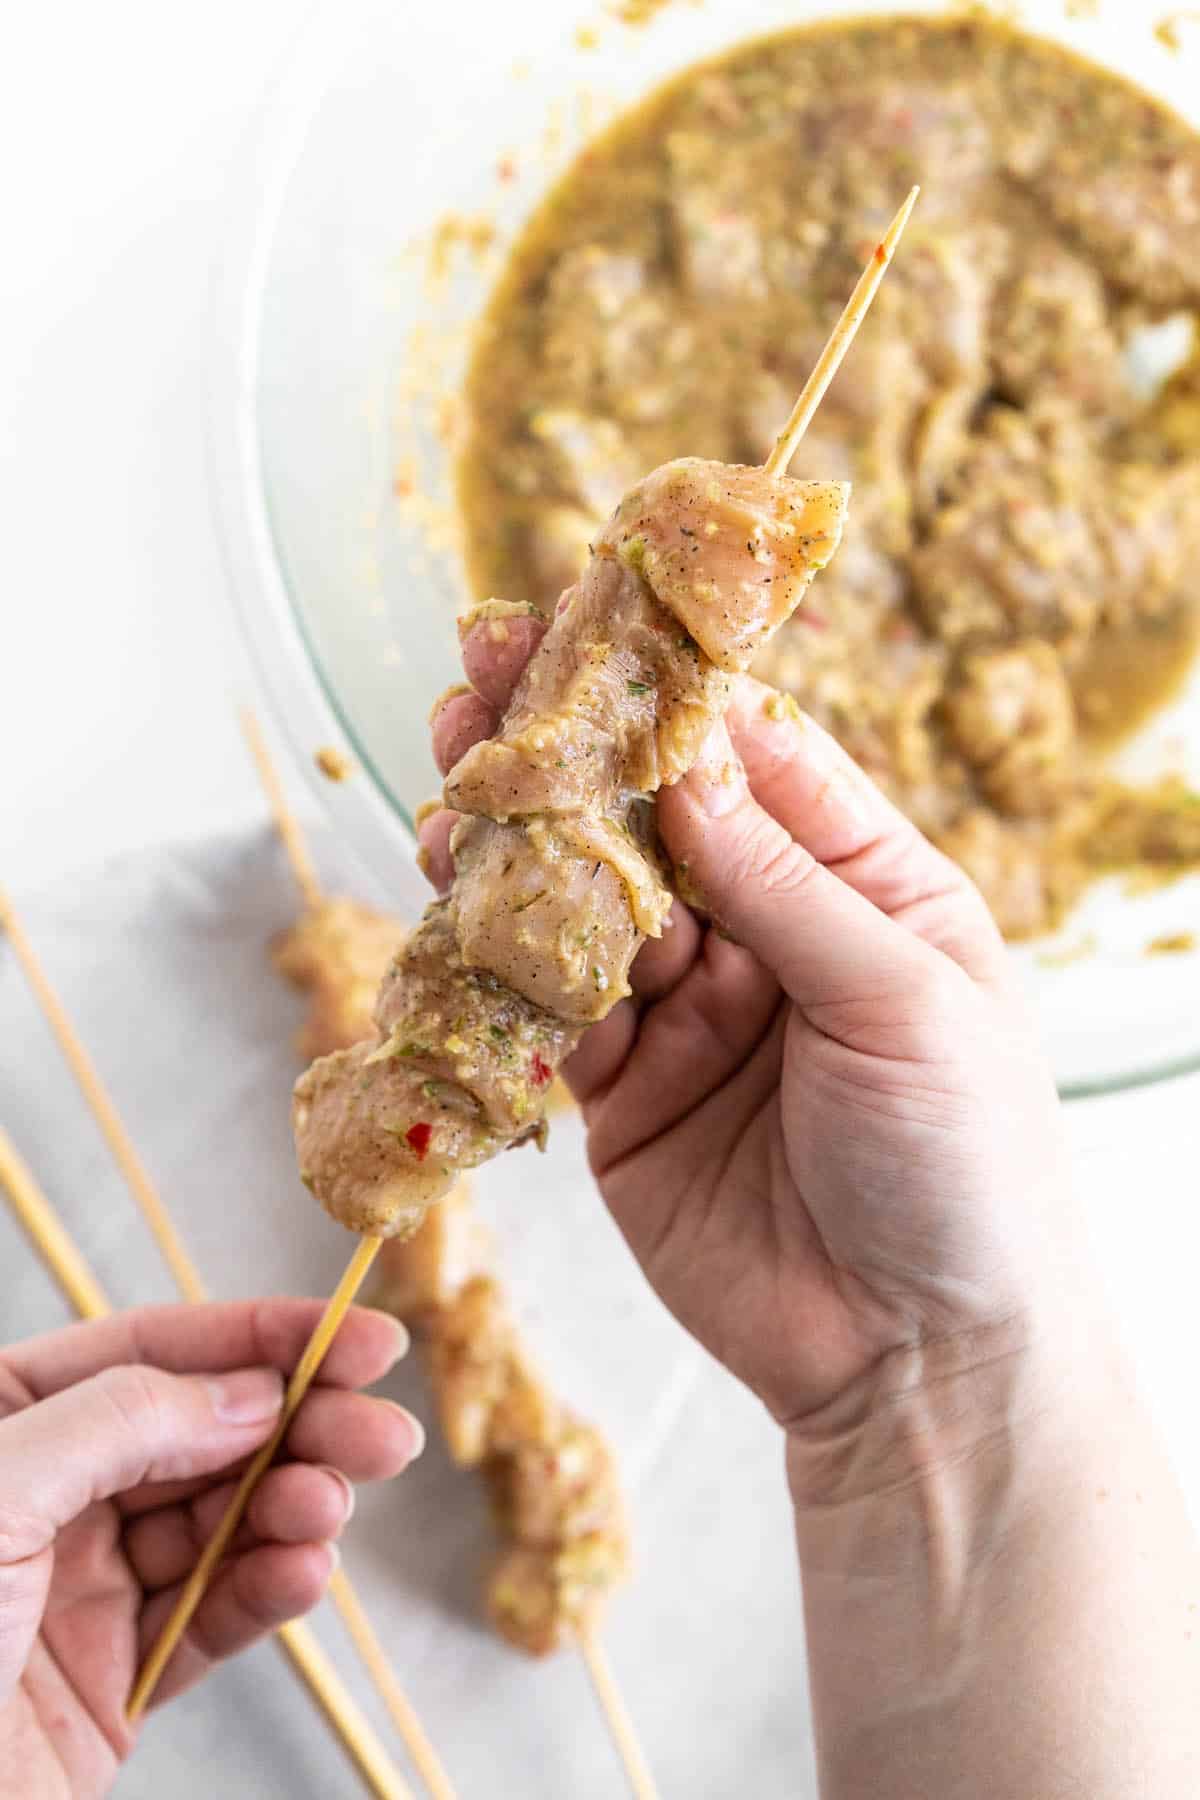 thread the chicken onto the skewers